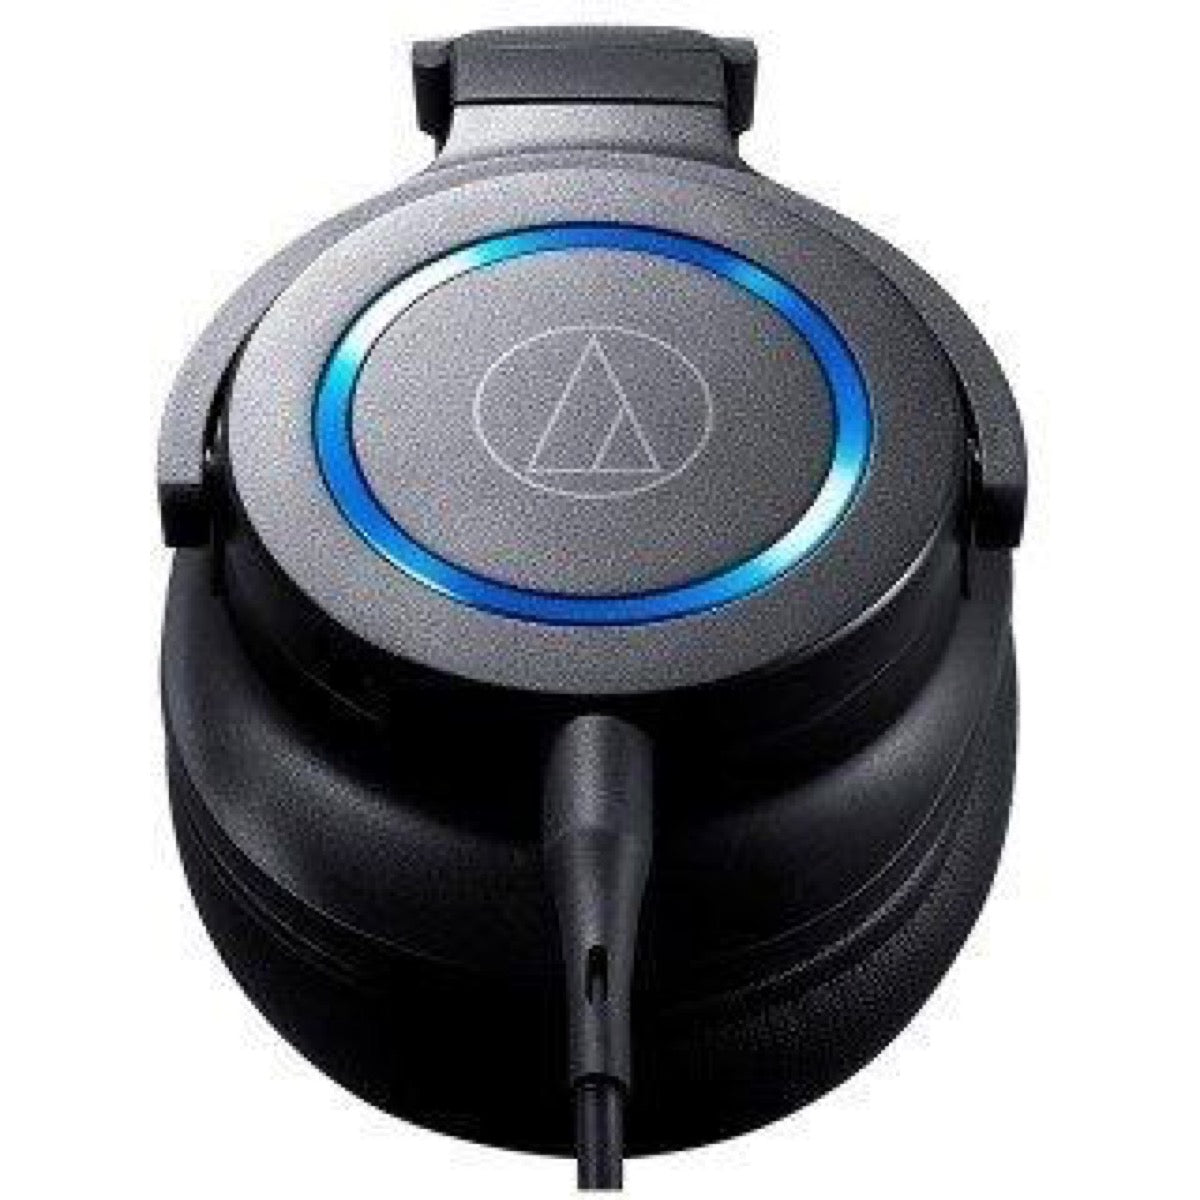 Audio-Technica ATH-G1 Premium Gaming Headset with Microphone